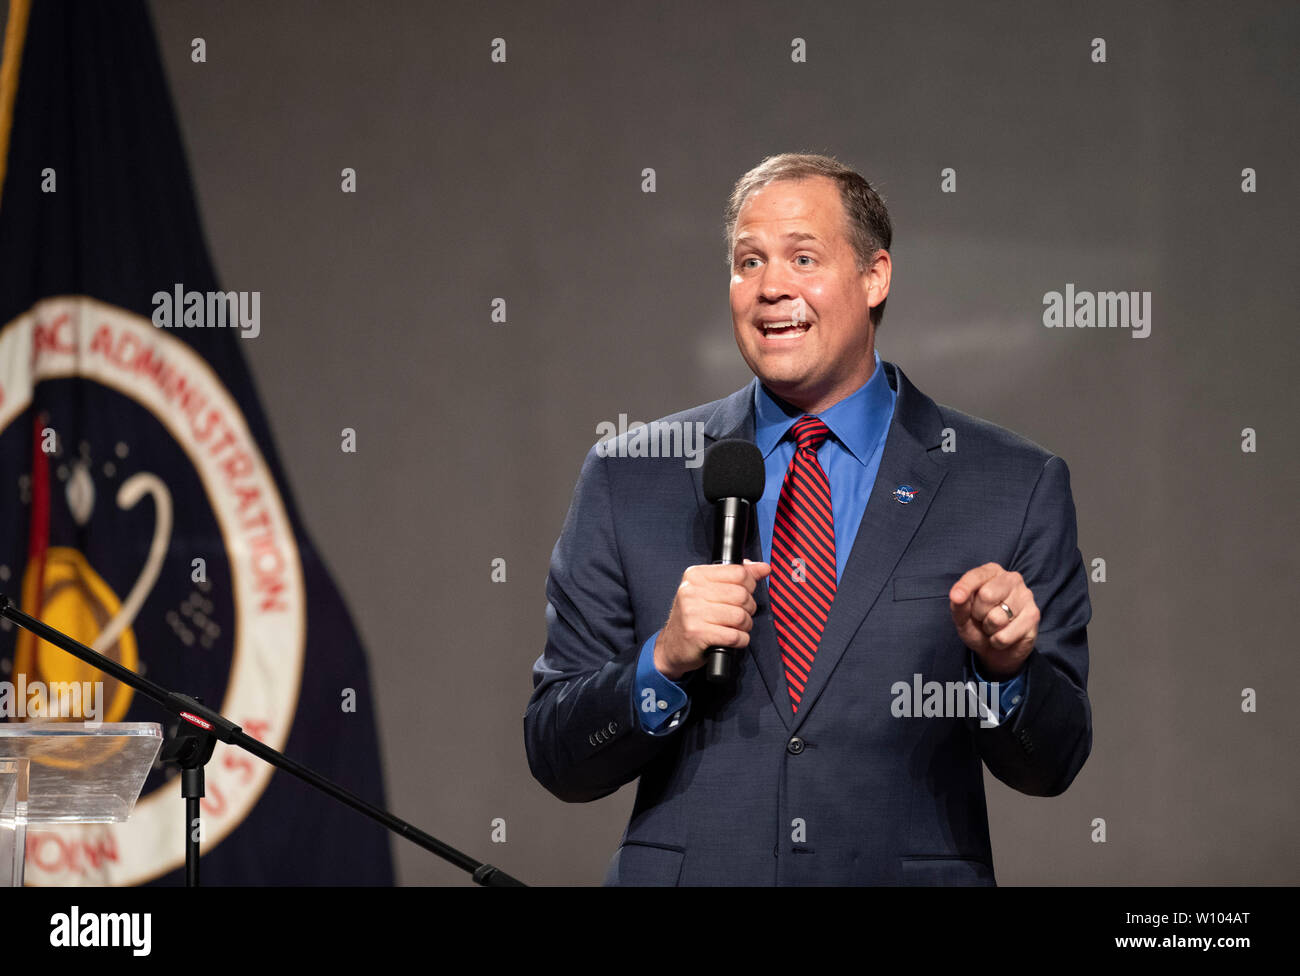 National Aeronautics and Space Administration Administrator Jim Bridenstine speaks at the Johnson Space Center near Houston, Texas during an event commemorating the 50th anniversary of the Apollo 11 spaceflight that was the first to land men on the moon in 1969. Stock Photo